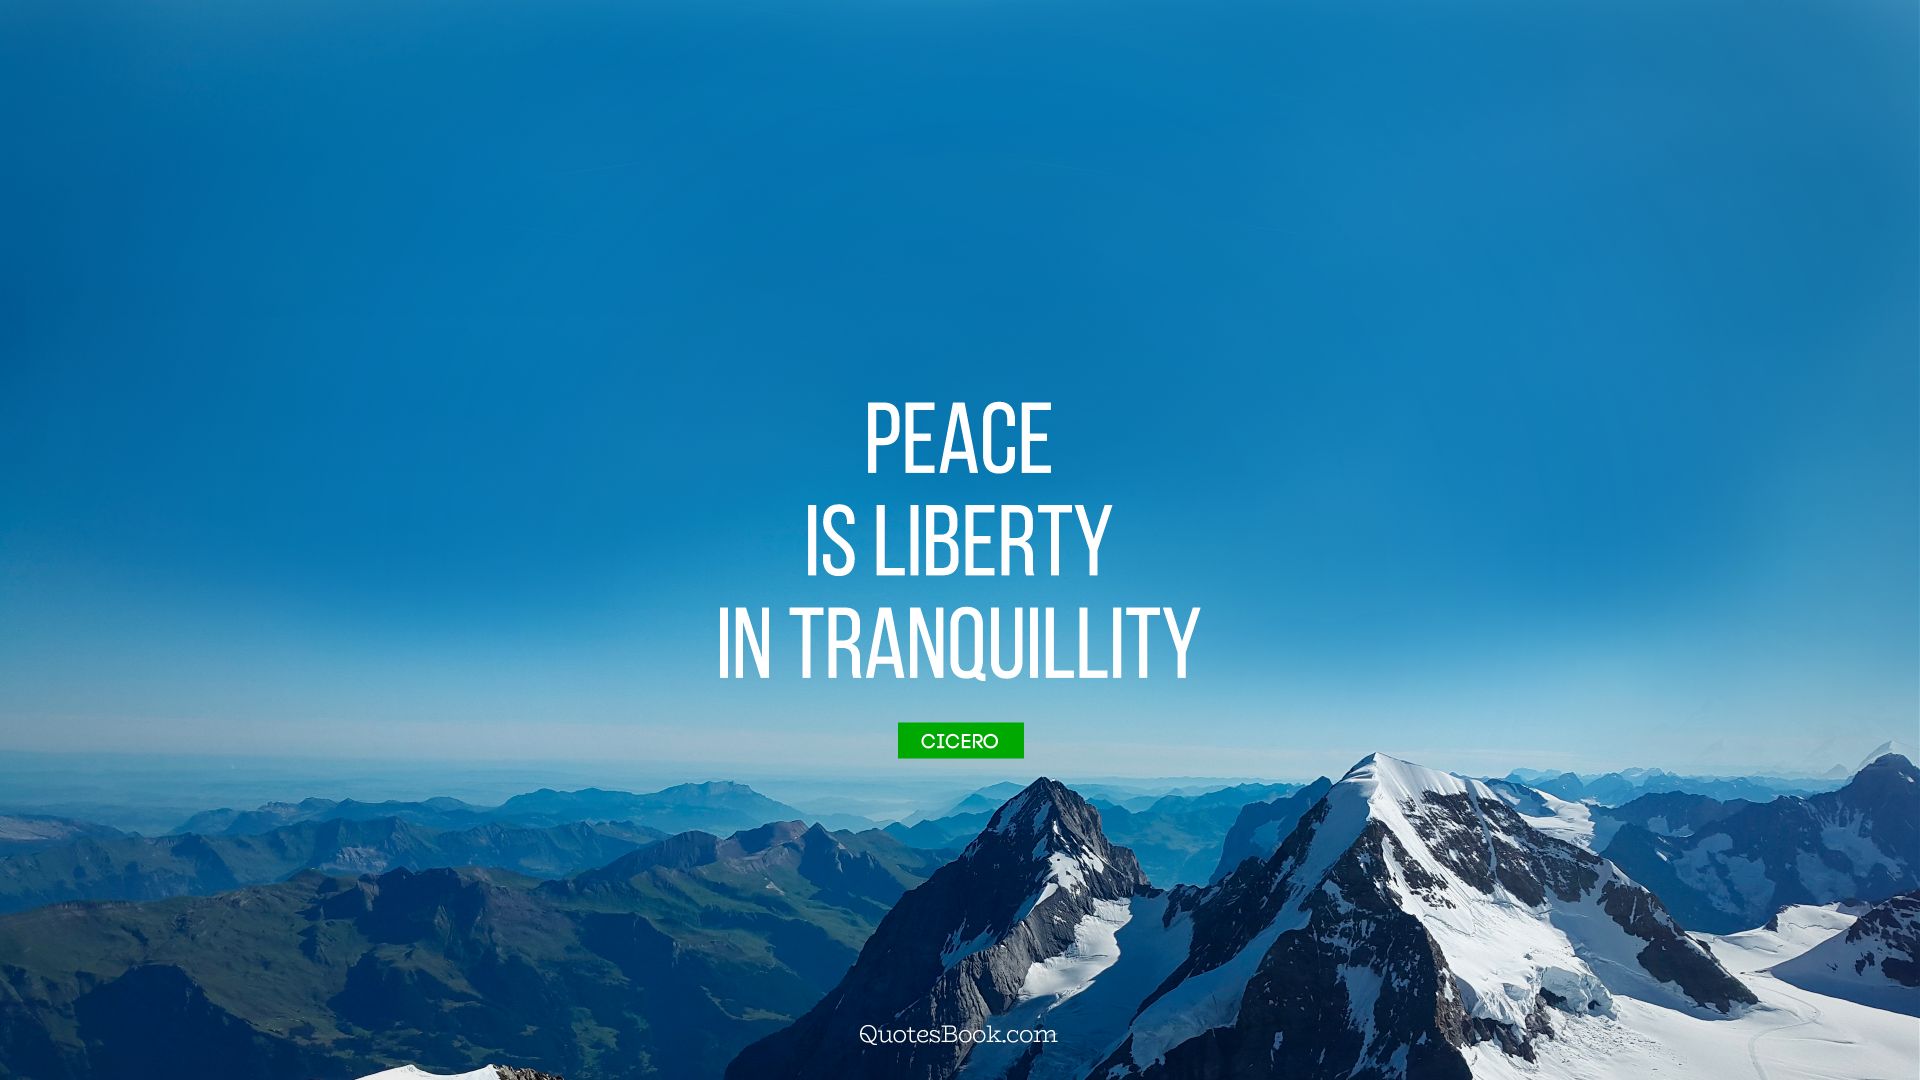 Peace is liberty in tranquillity. - Quote by Cicero